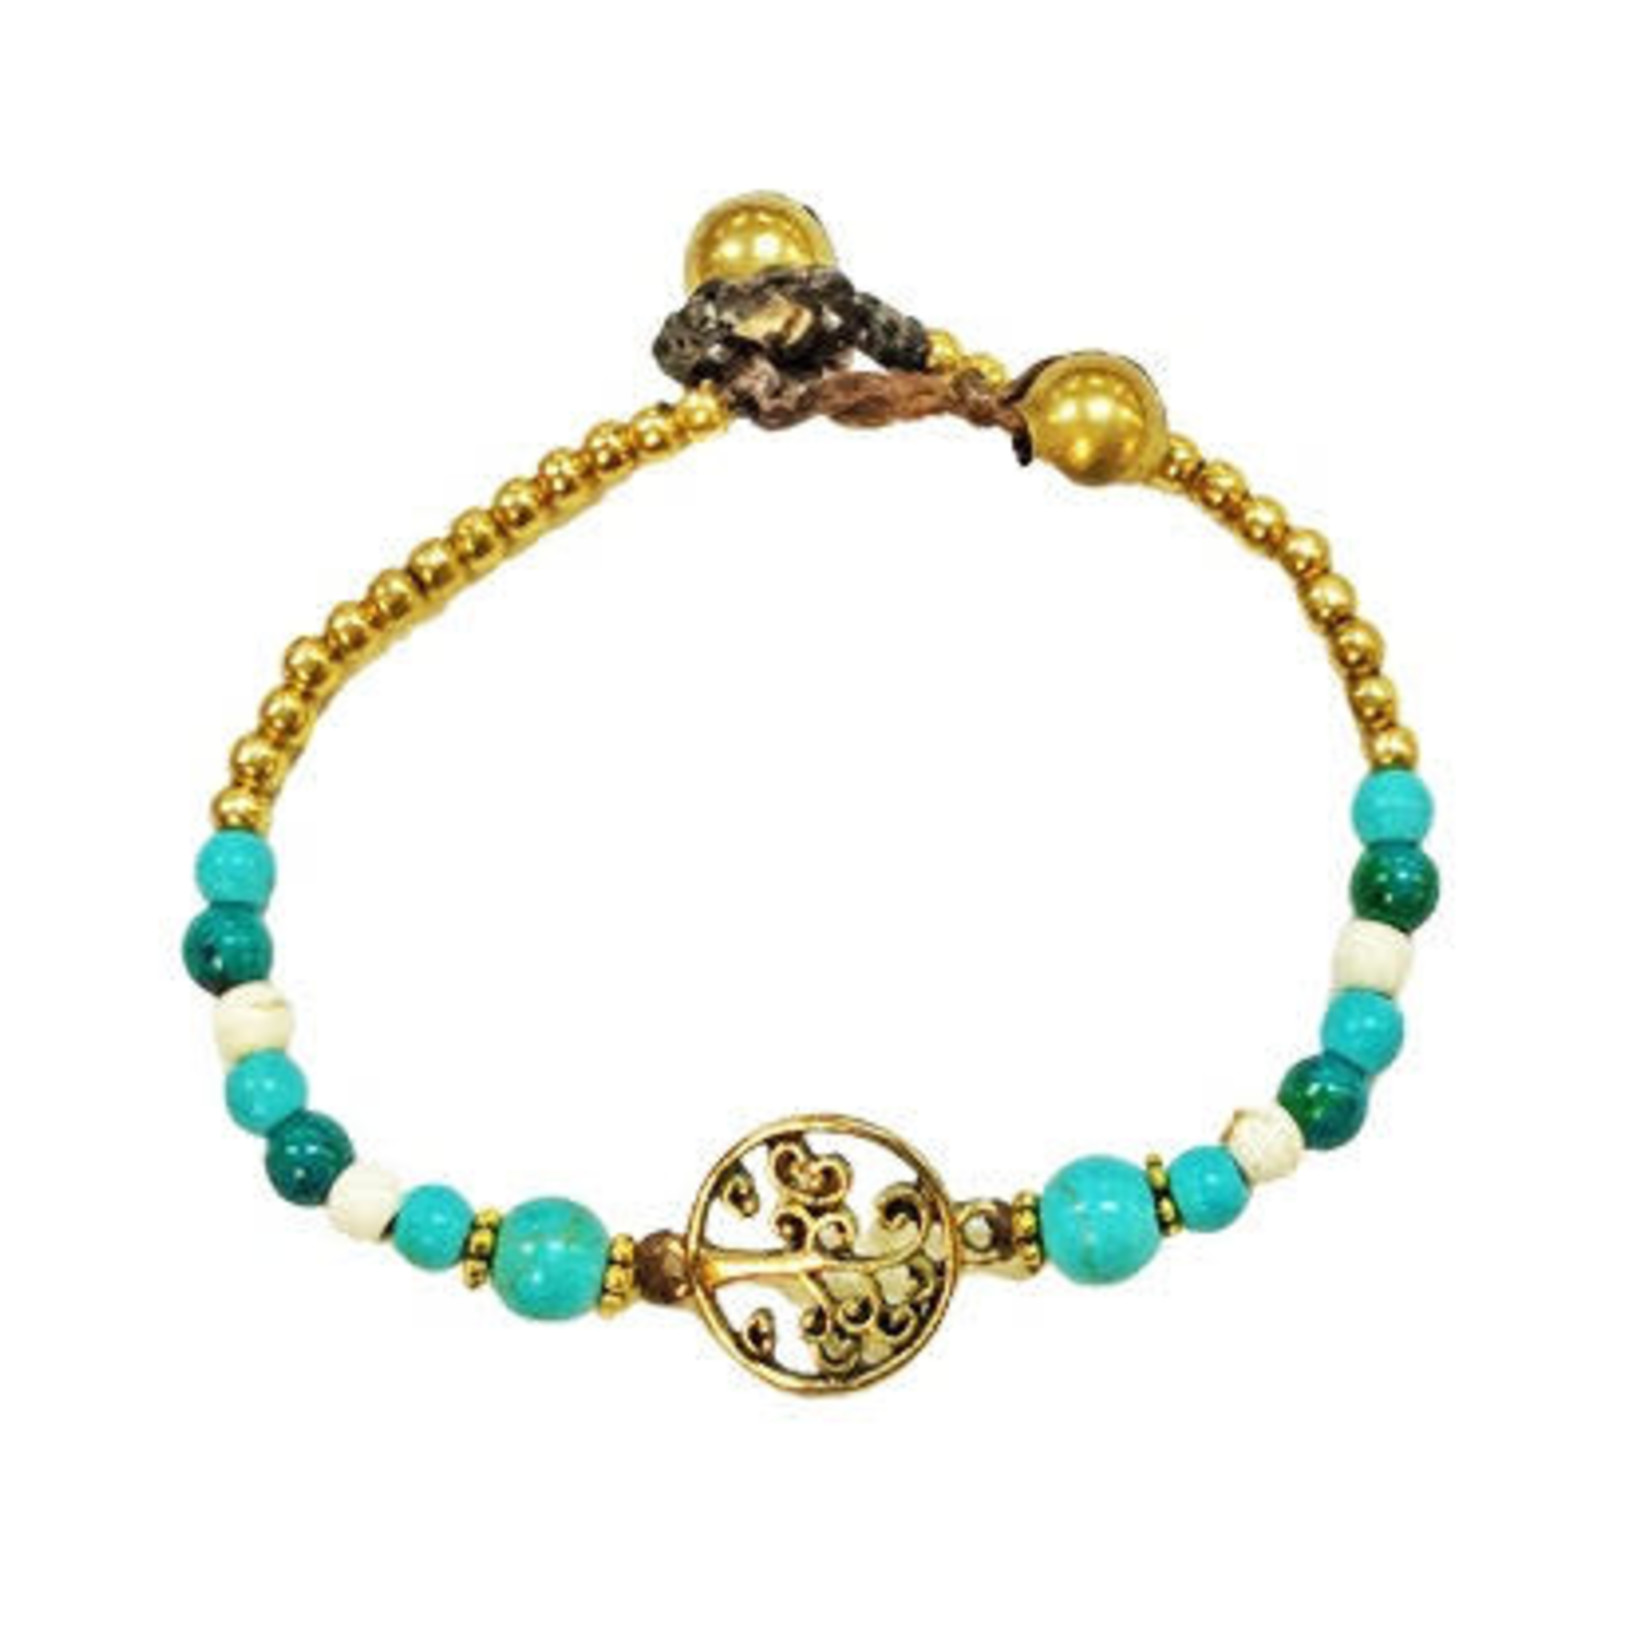 Tree of Life Brass and Glass Bead Bracelet TOL1 Blue/Green/White